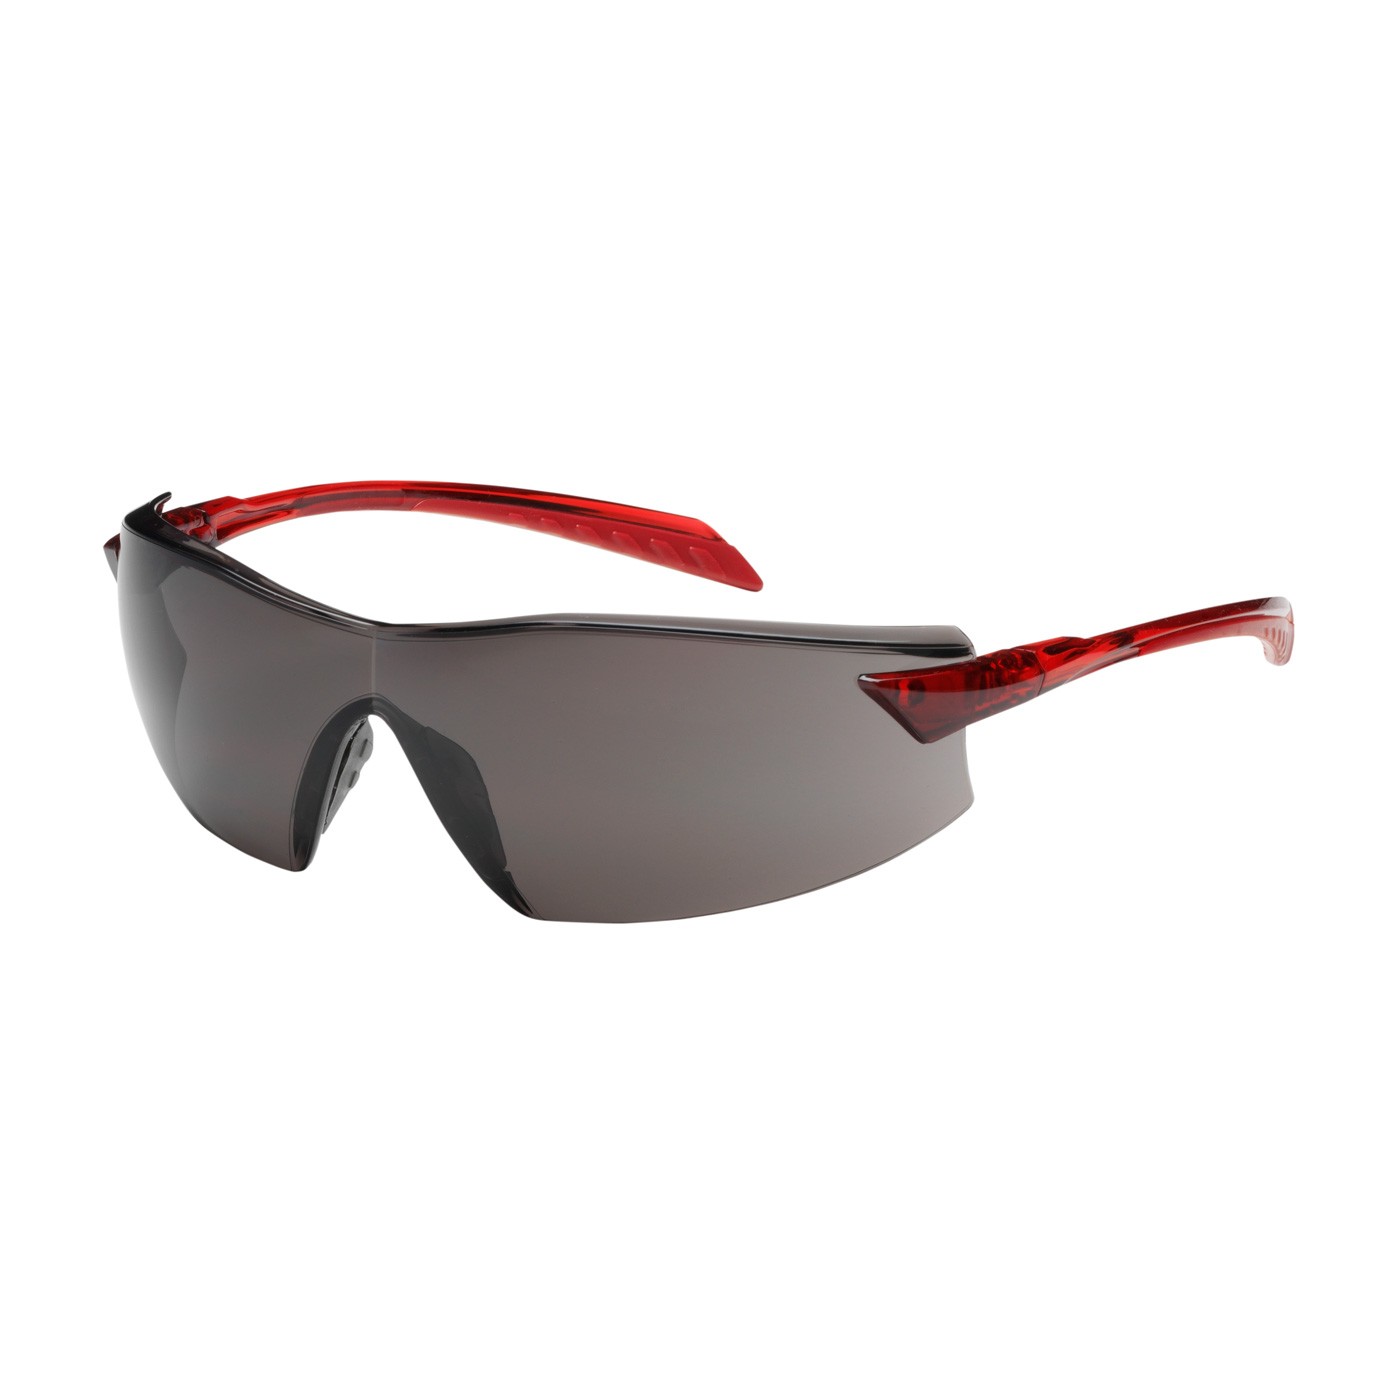 Radar™ Rimless Safety Glasses with Red Temple, Gray Lens and Anti-Scratch / Anti-Fog Coating  (#250-45-1021)